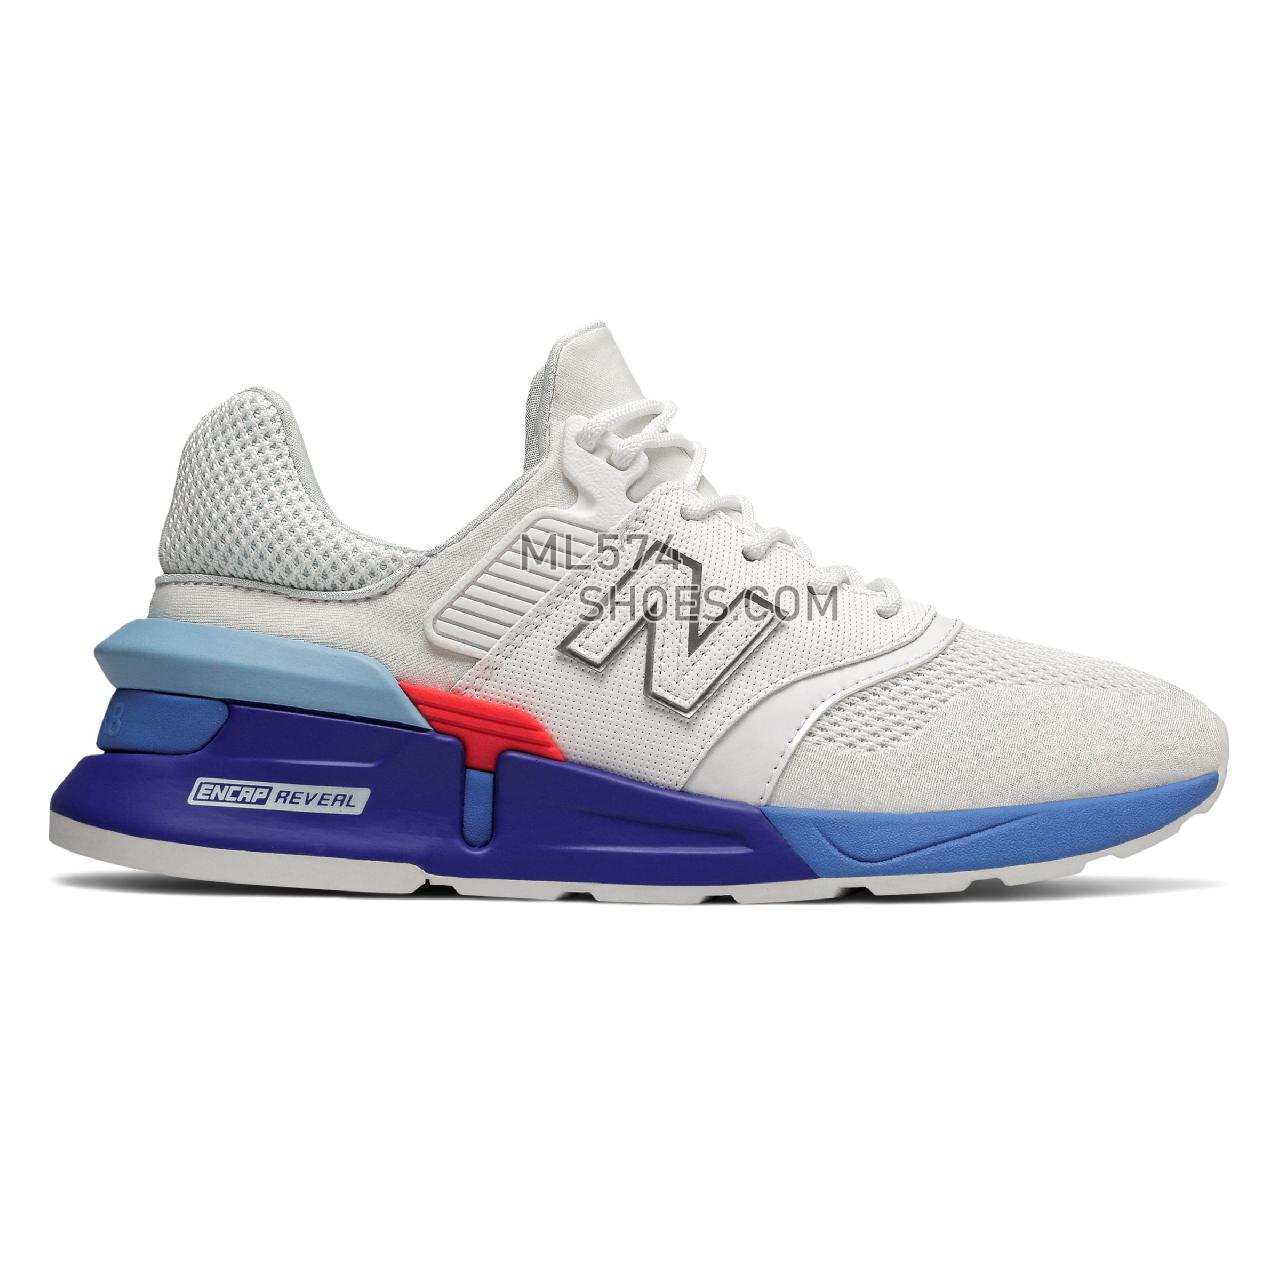 New Balance 997 Sport - Women's Sport Style Sneakers - White with Summer Sky - WS997HC